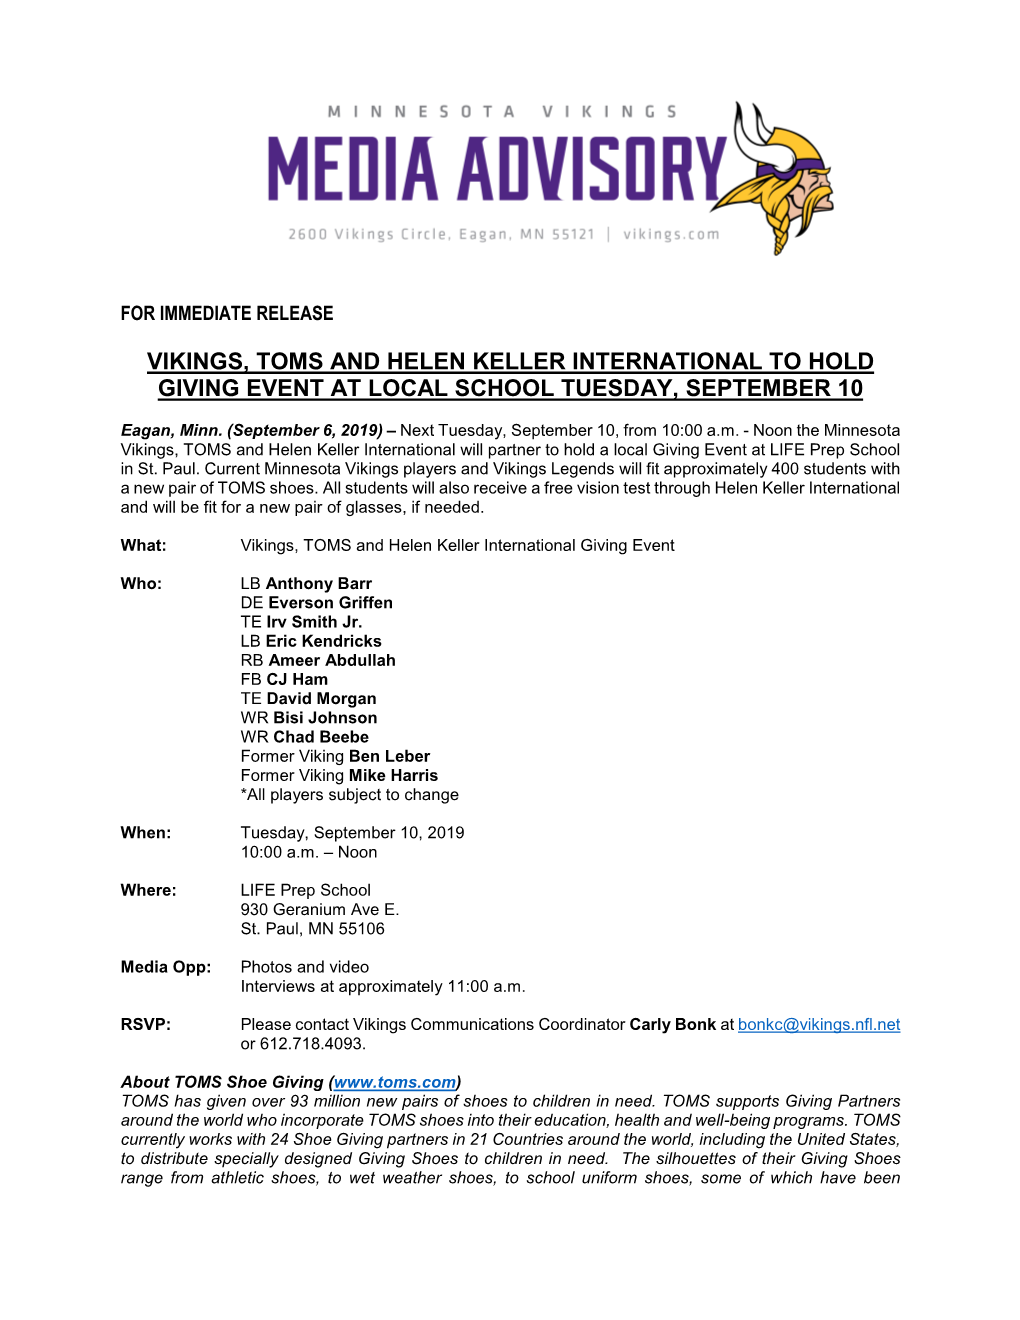 Vikings, Toms and Helen Keller International to Hold Giving Event at Local School Tuesday, September 10